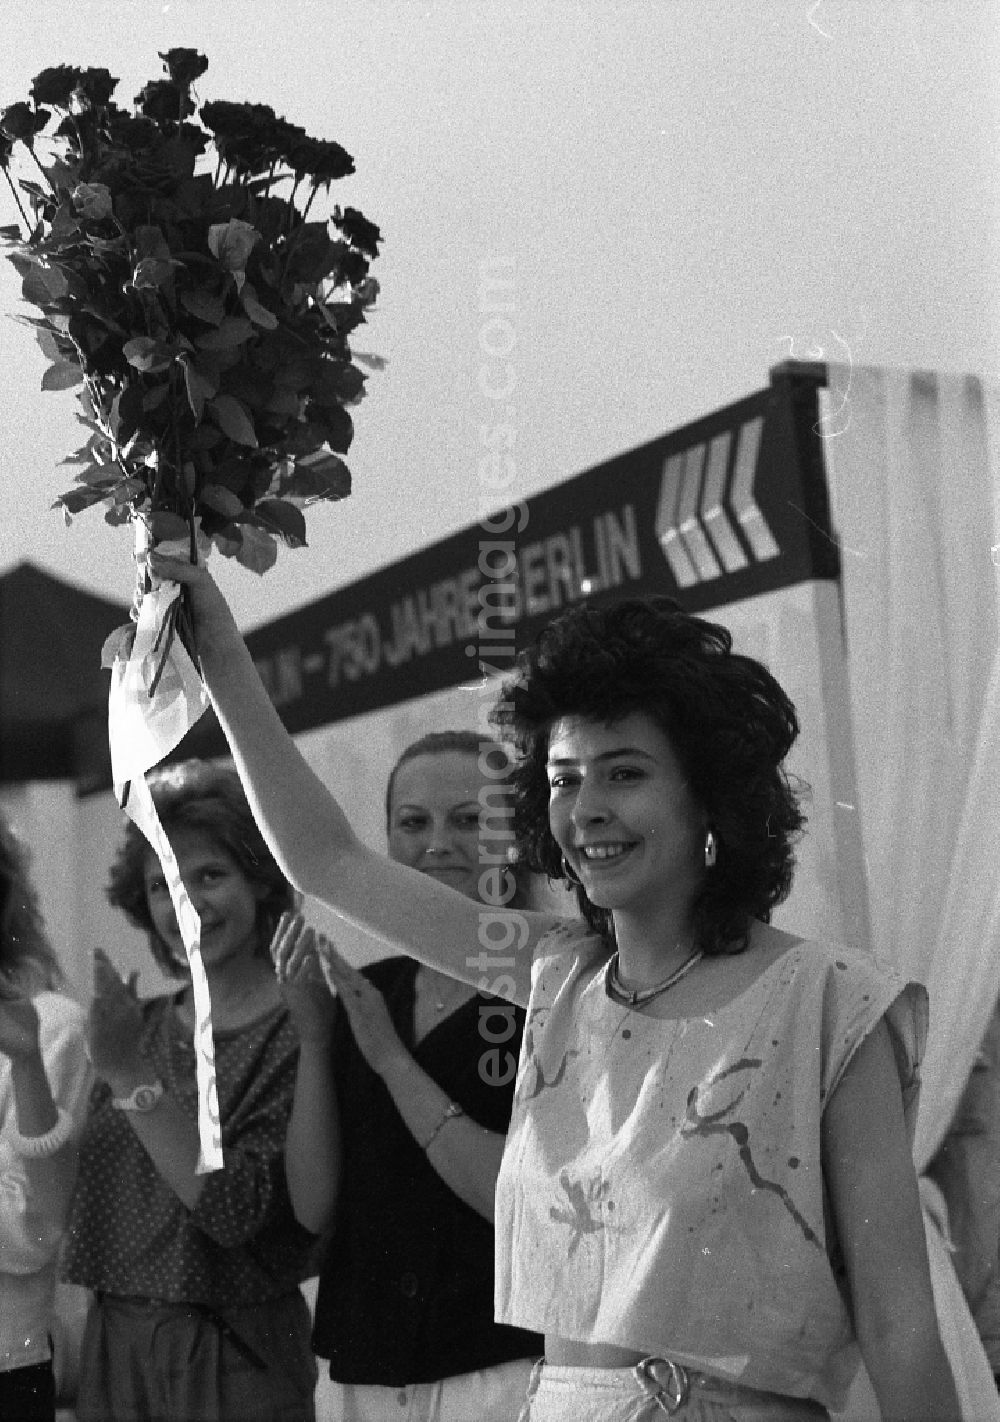 GDR image archive: Berlin - Cornelia Franzke is happy about the election to the Marzahn Spring Festival in Berlin East Berlin on the territory of the former GDR, German Democratic Republic. The 18-year-old skilled worker for data processing at VEB Maschinenhandel prevailed in May 1987 among nine applicants from all over East Berlin for the Miss election